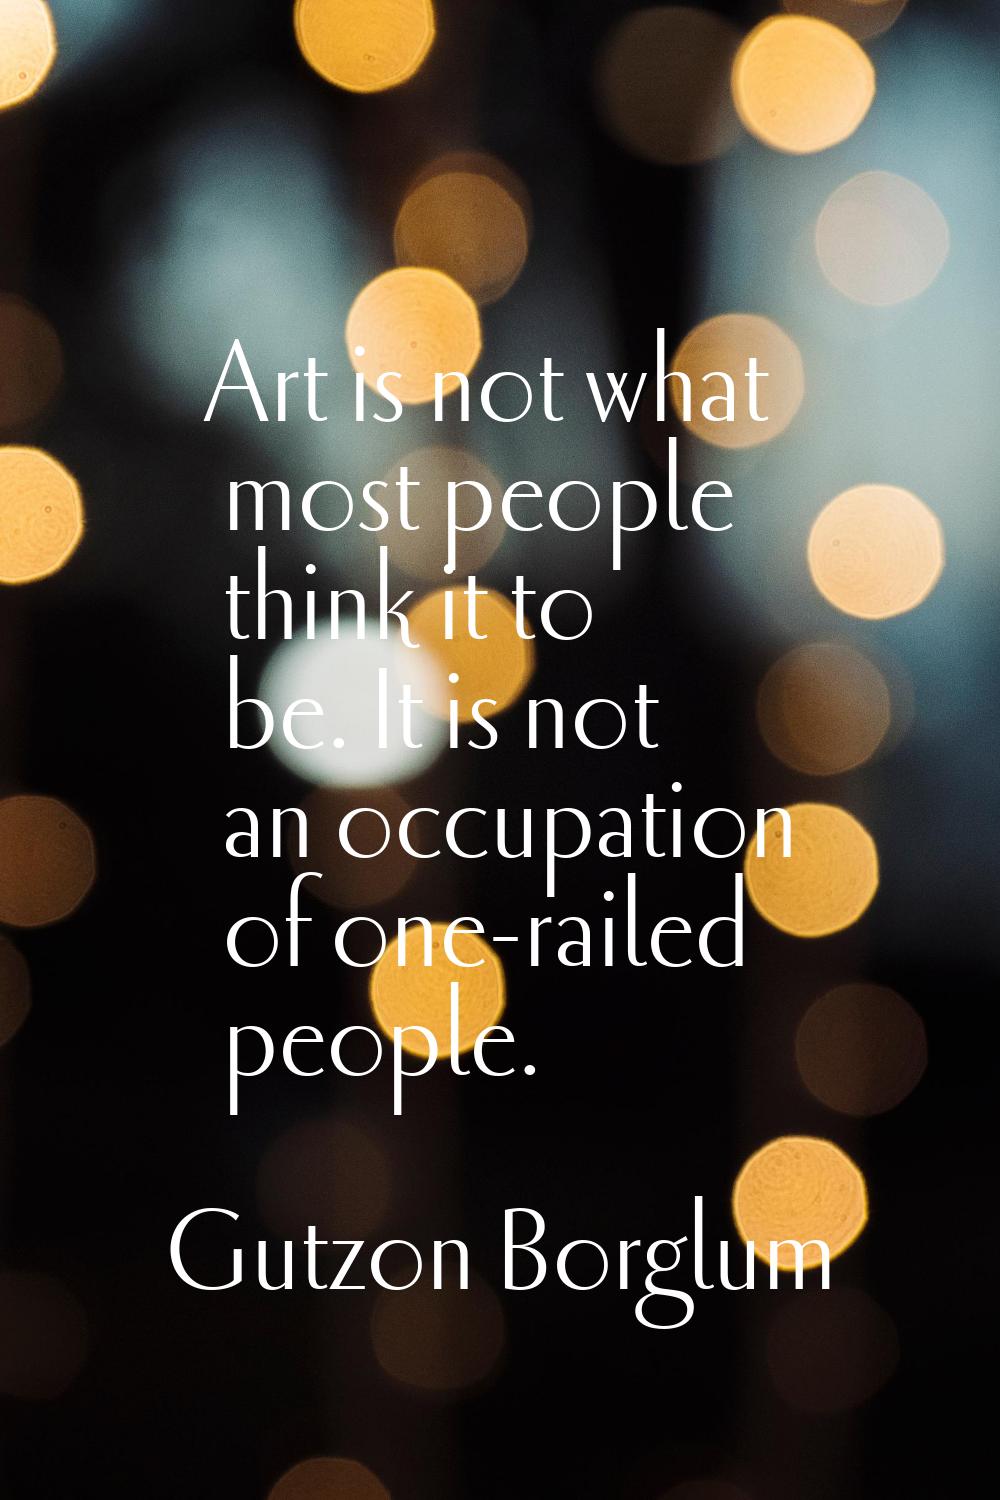 Art is not what most people think it to be. It is not an occupation of one-railed people.